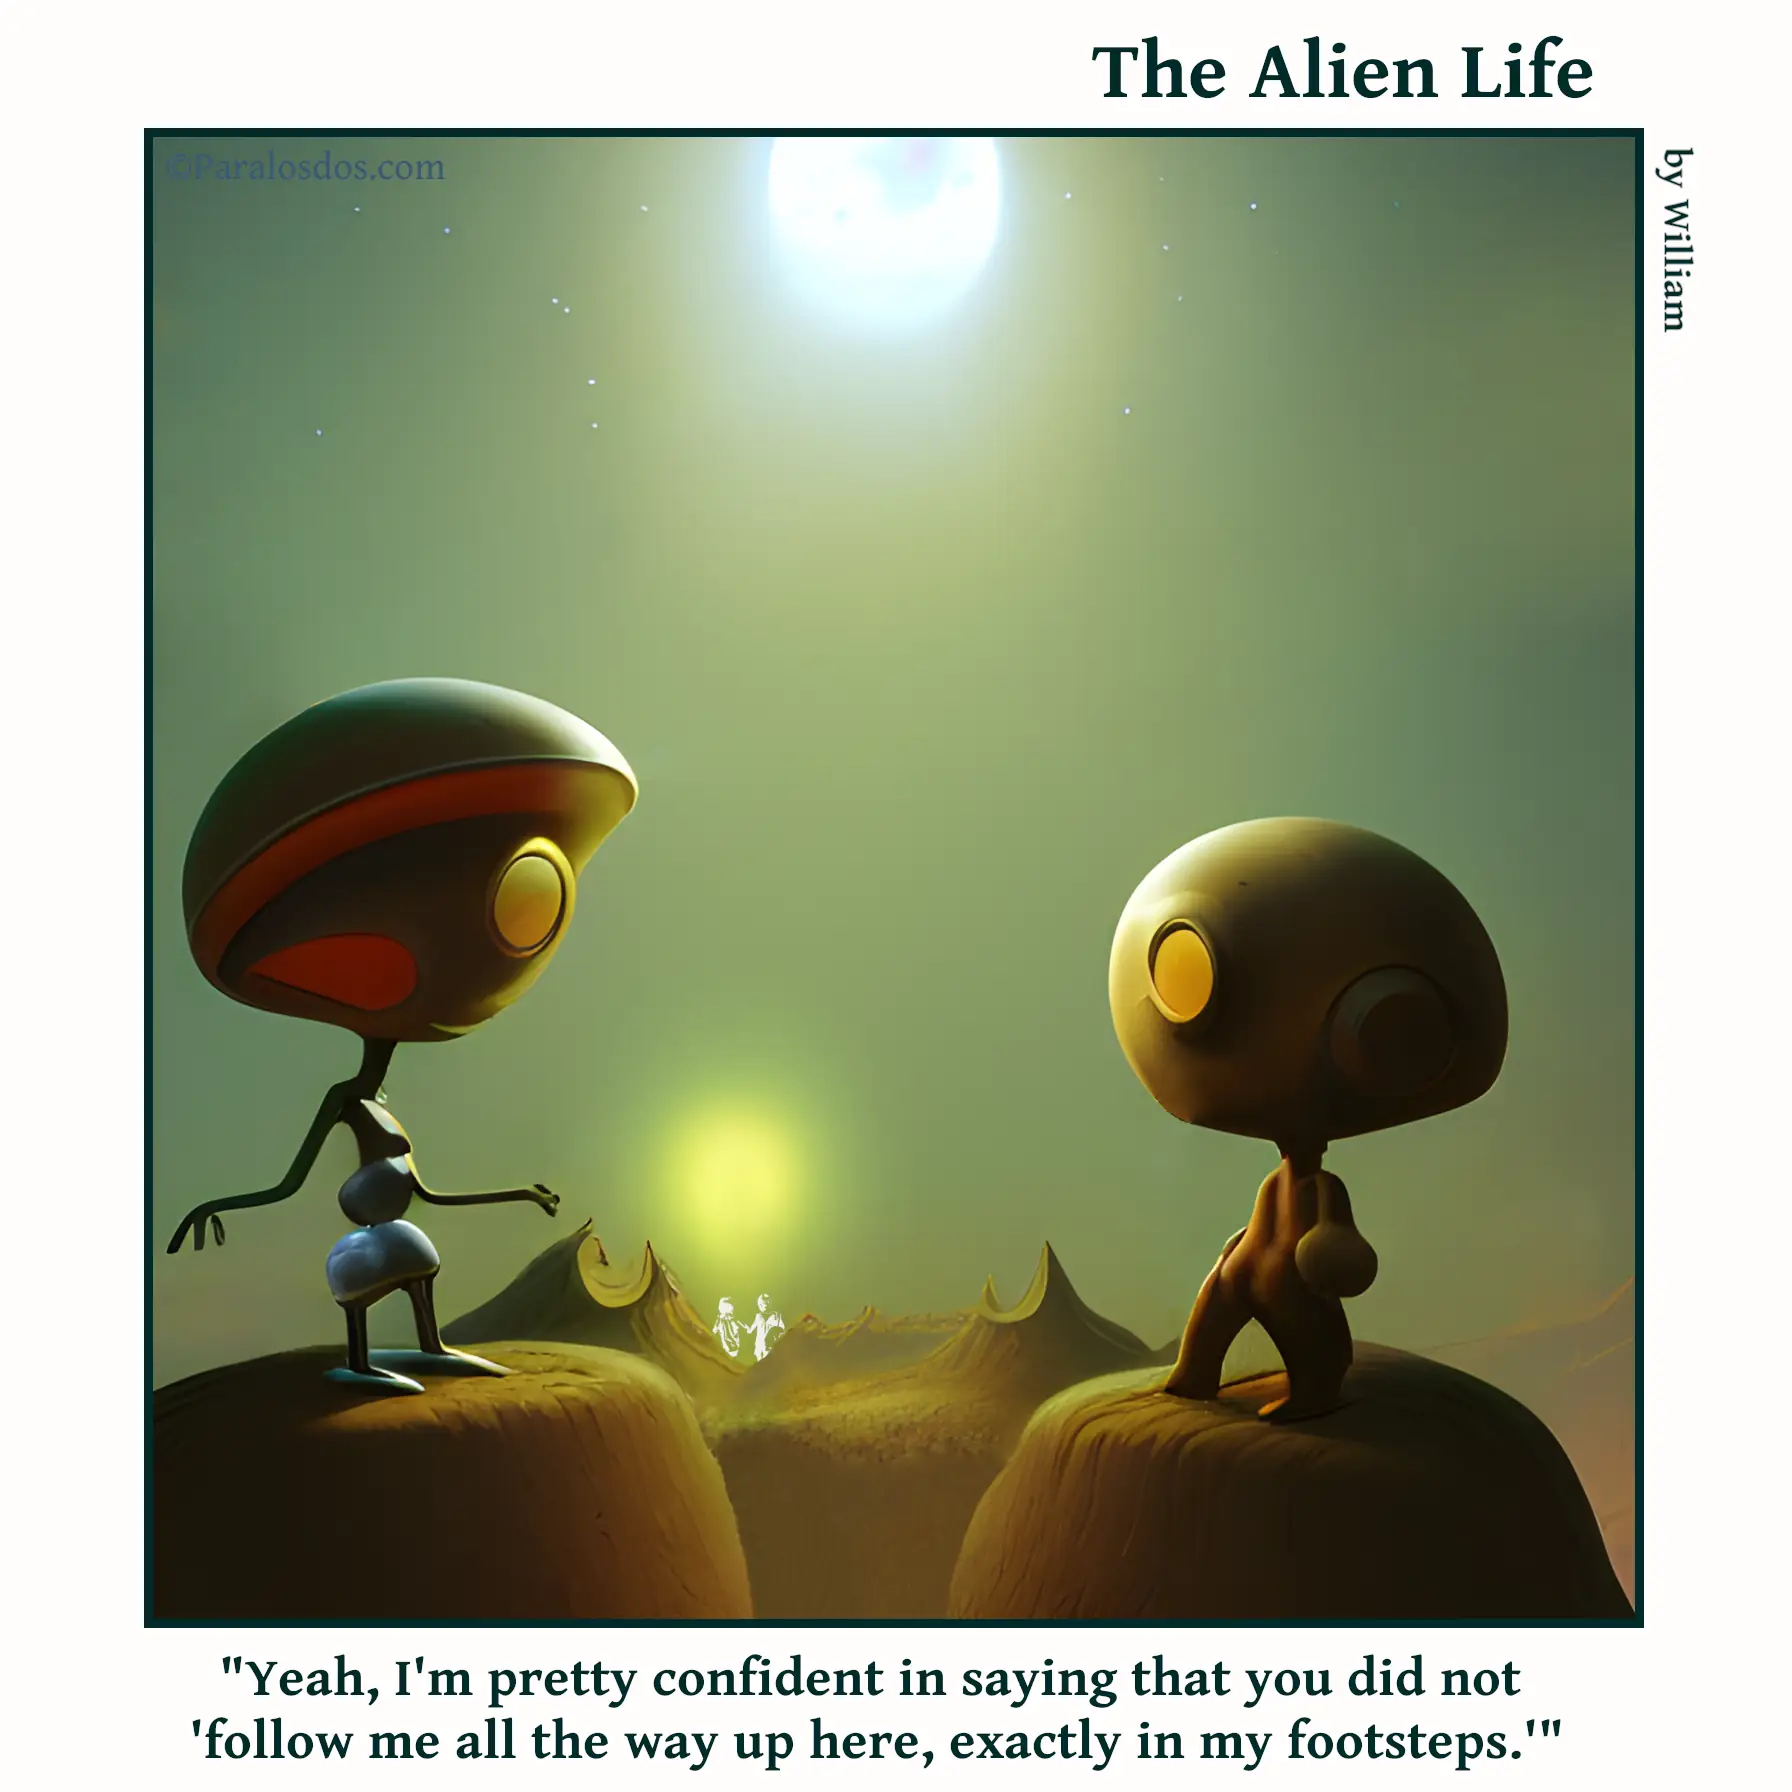 The Alien Life, one panel Comic. Two aliens are facing each other, they are standing on different small mountaintops. The caption reads: "Yeah, I'm pretty confident in saying that you did not 'follow me all the way up here, exactly in my footsteps.'"